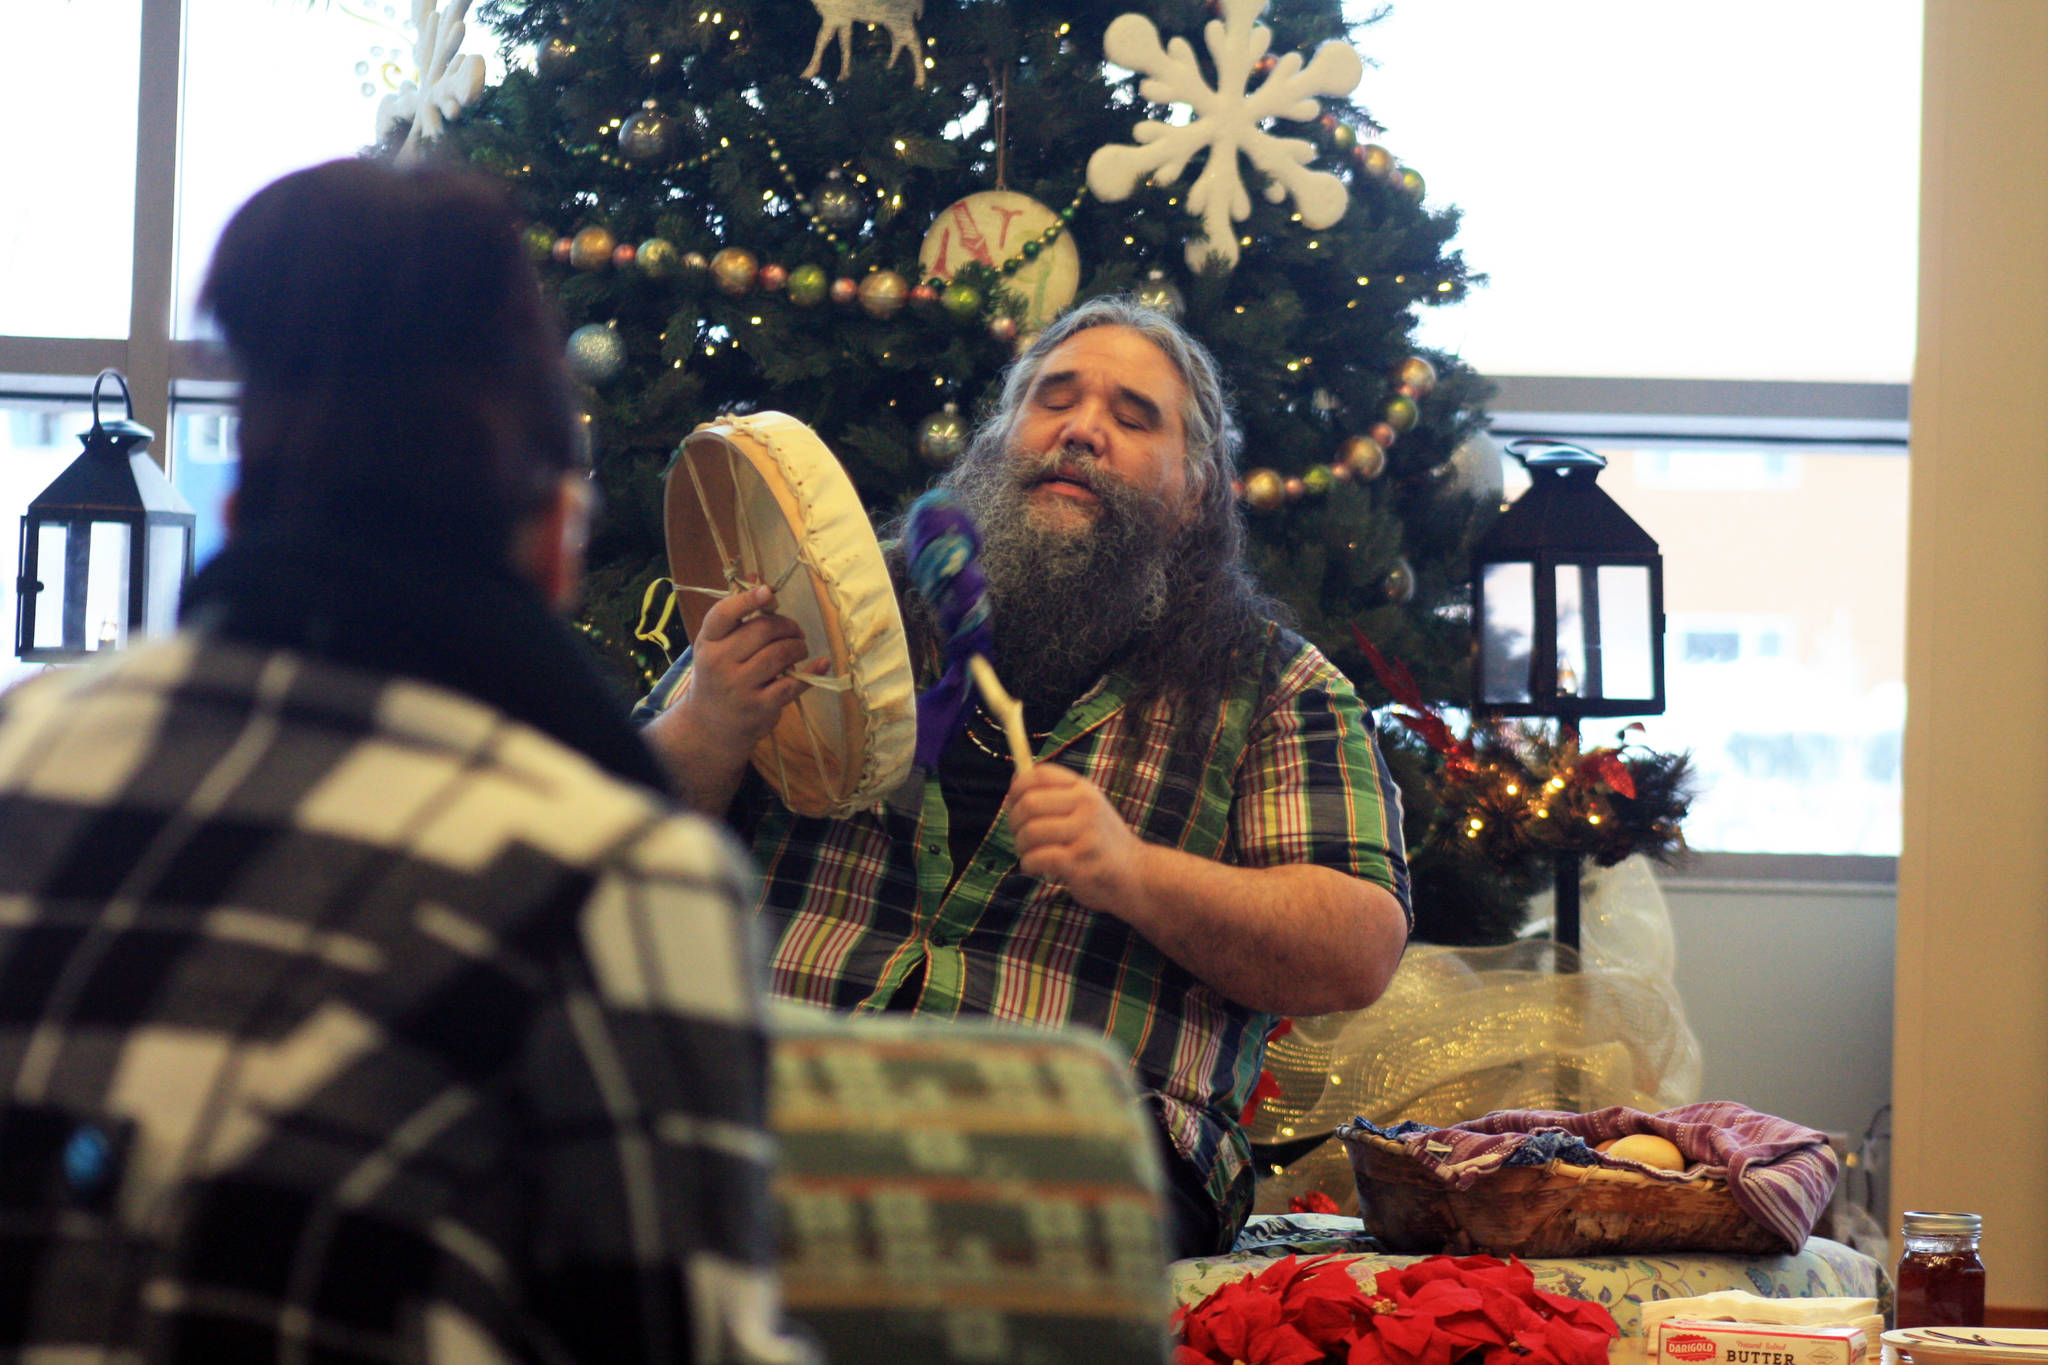 A woman listens to local musician George Demientieff Holly during a Dec. 21 winter solstice performance at Dena’ina Wellness Center in downtown Kenai. (Photo by Erin Thompson/Peninsula Clarion)